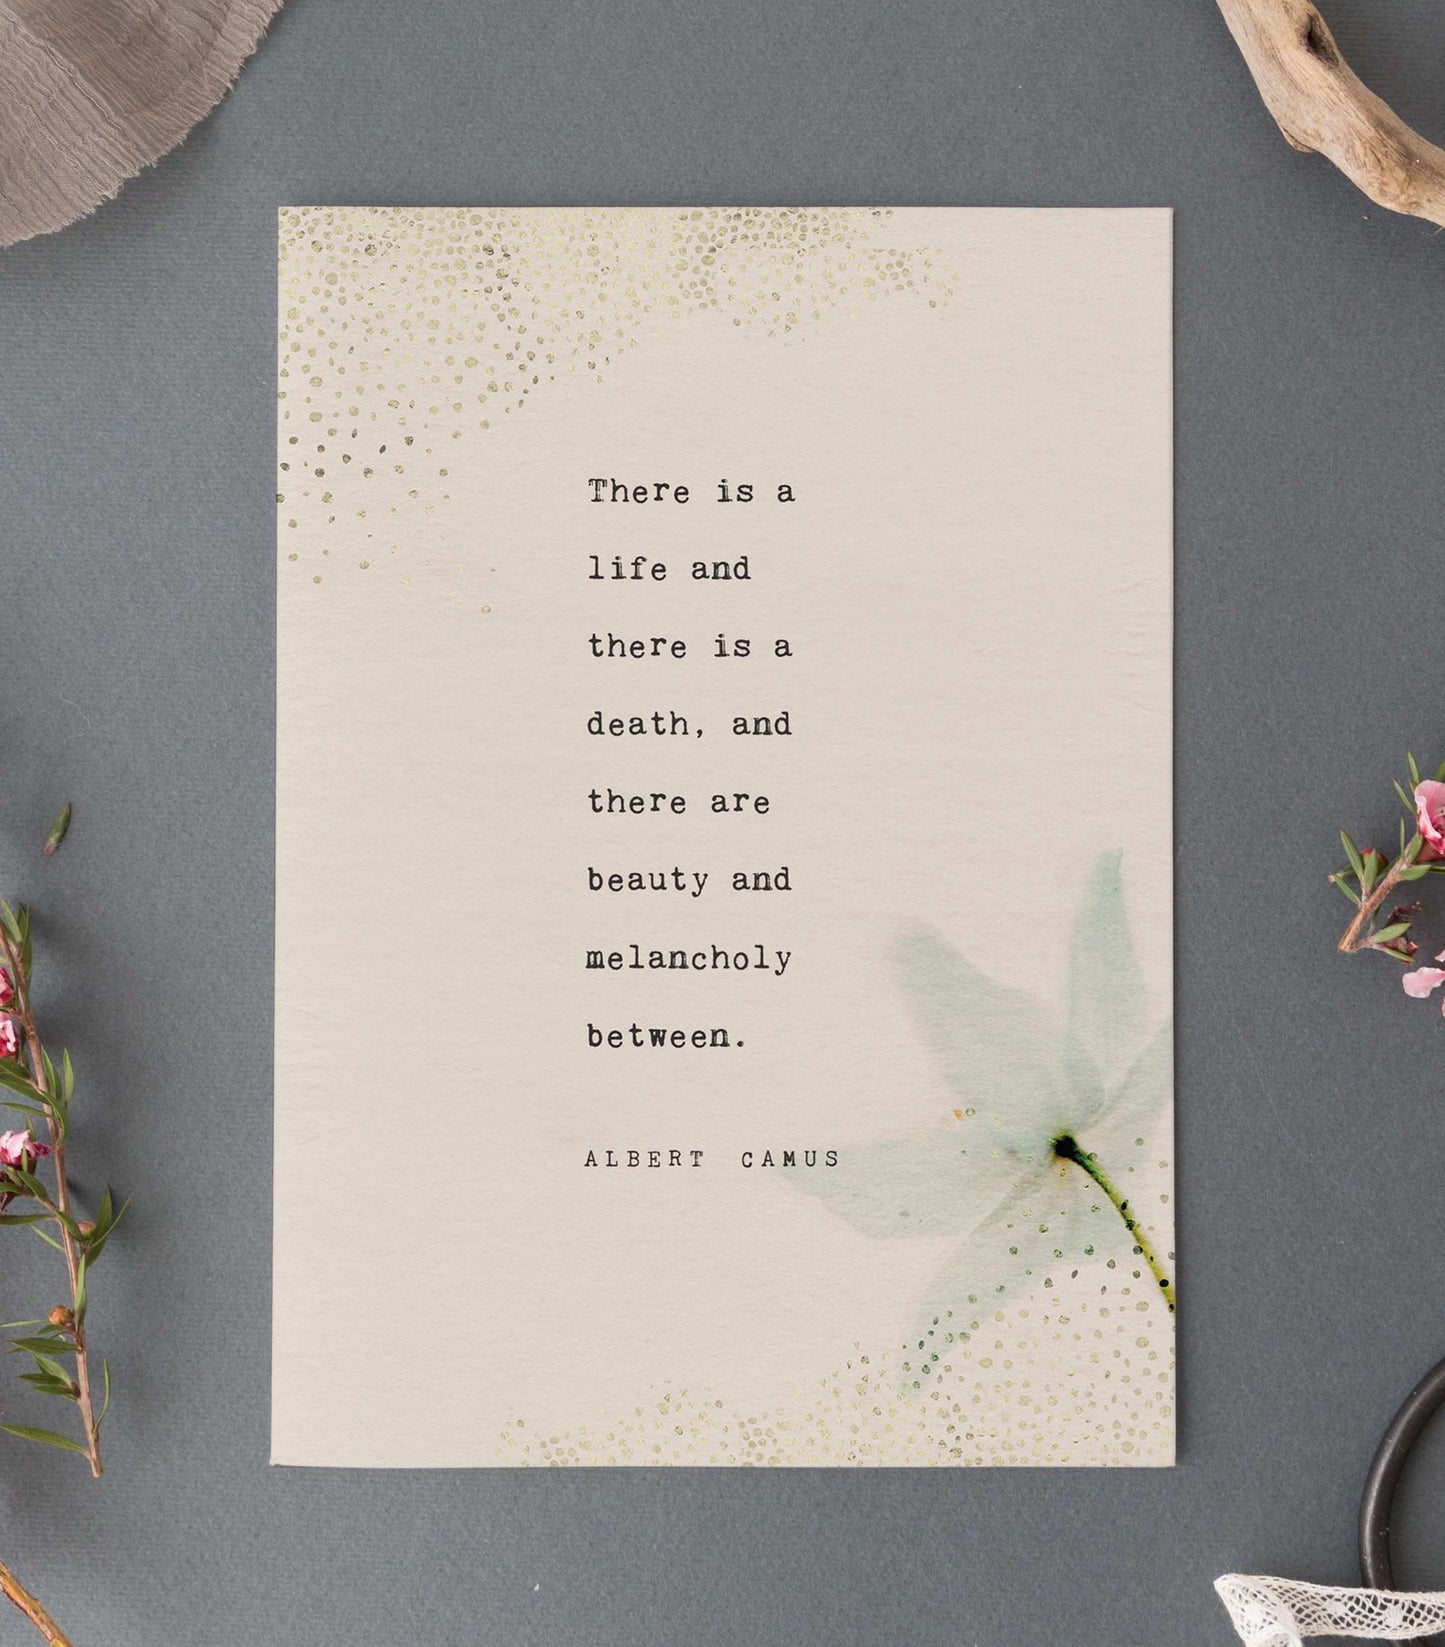 Albert Camus quote print "There is a life and there is a death, and there are beauty and melancholy between" wall art